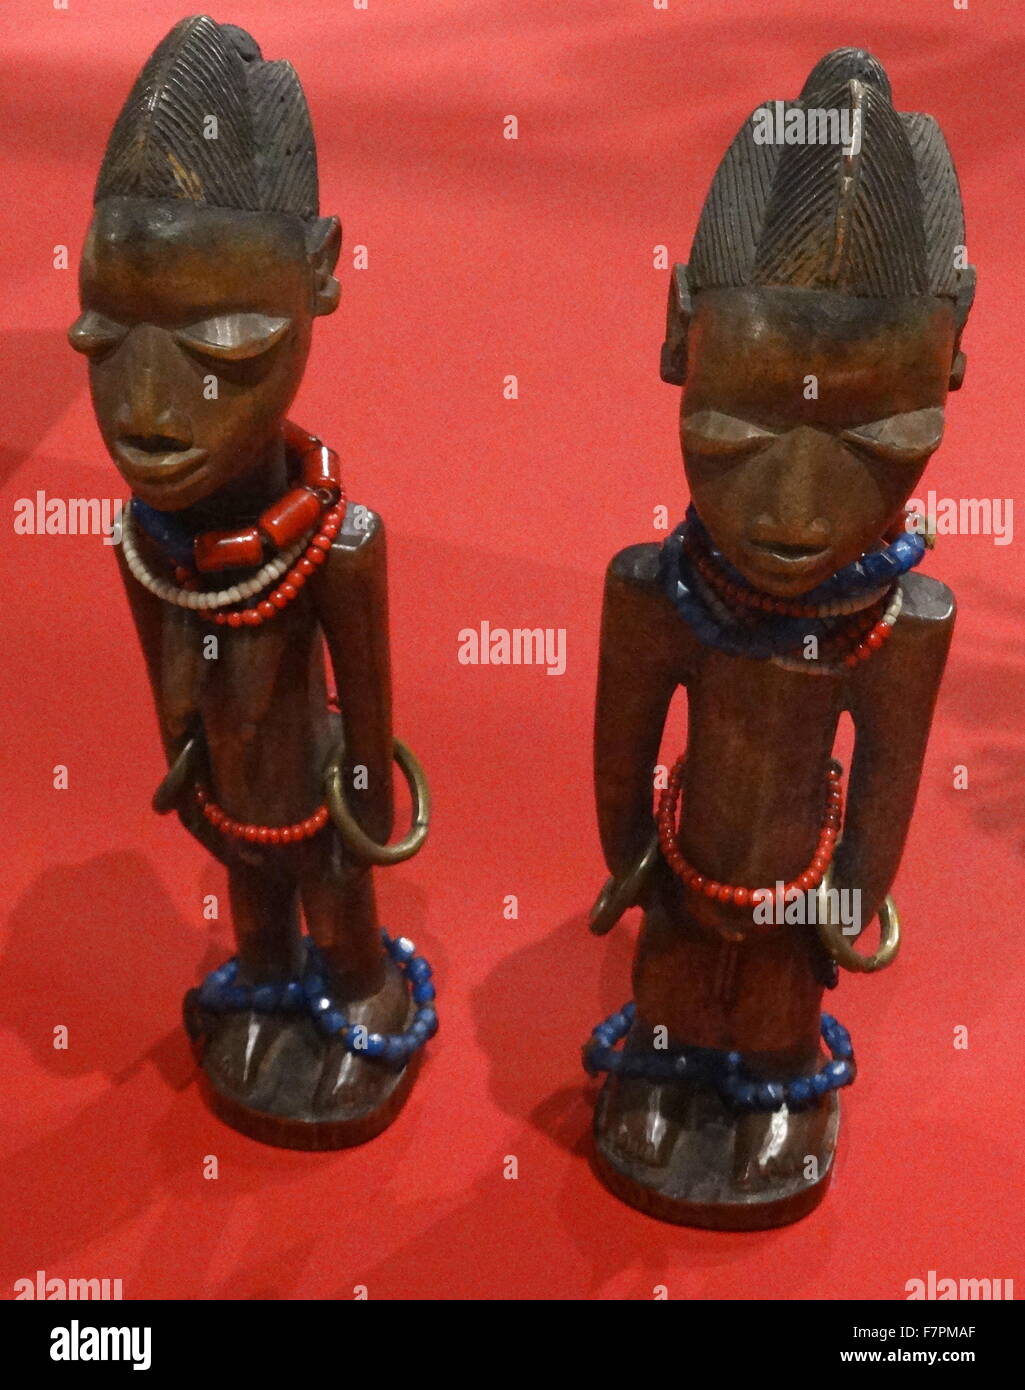 Wooden figures of deceased twins from the Yoruba people of Nigeria. Made from wood, beads and brass, 1870-1910. Stock Photo